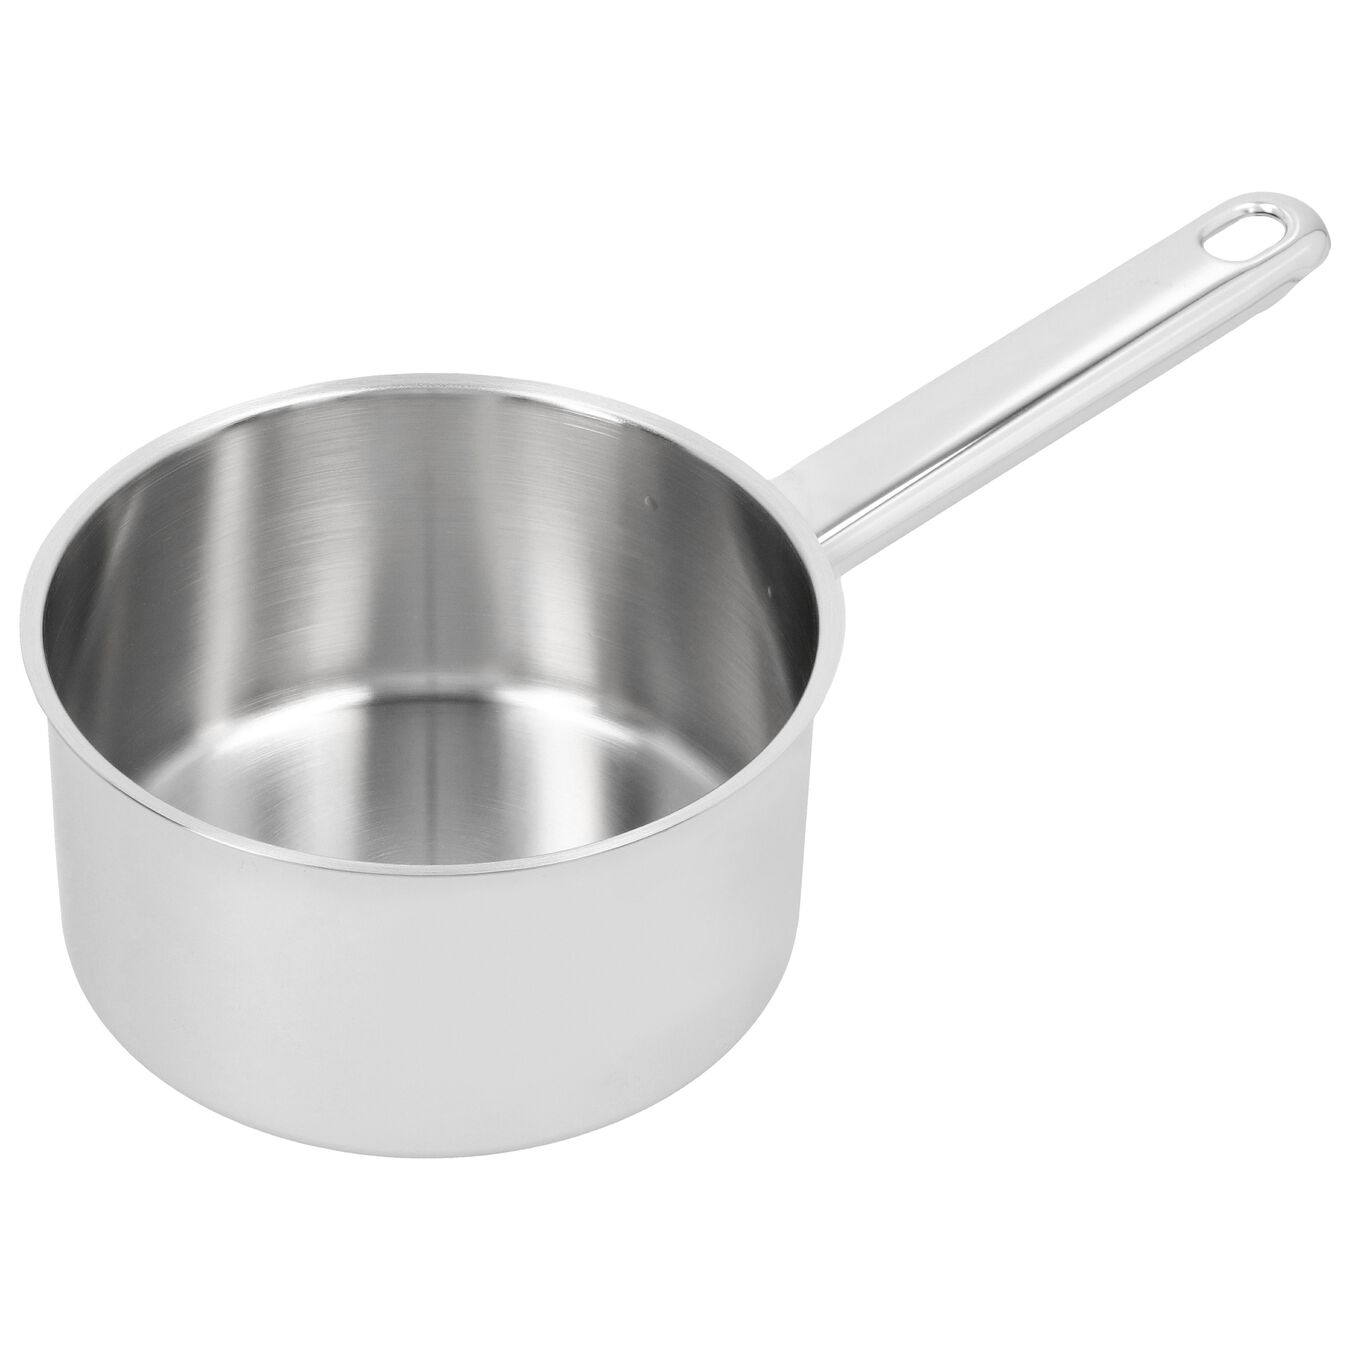 14 cm 18/10 Stainless Steel Saucepan without lid silver,,large 5